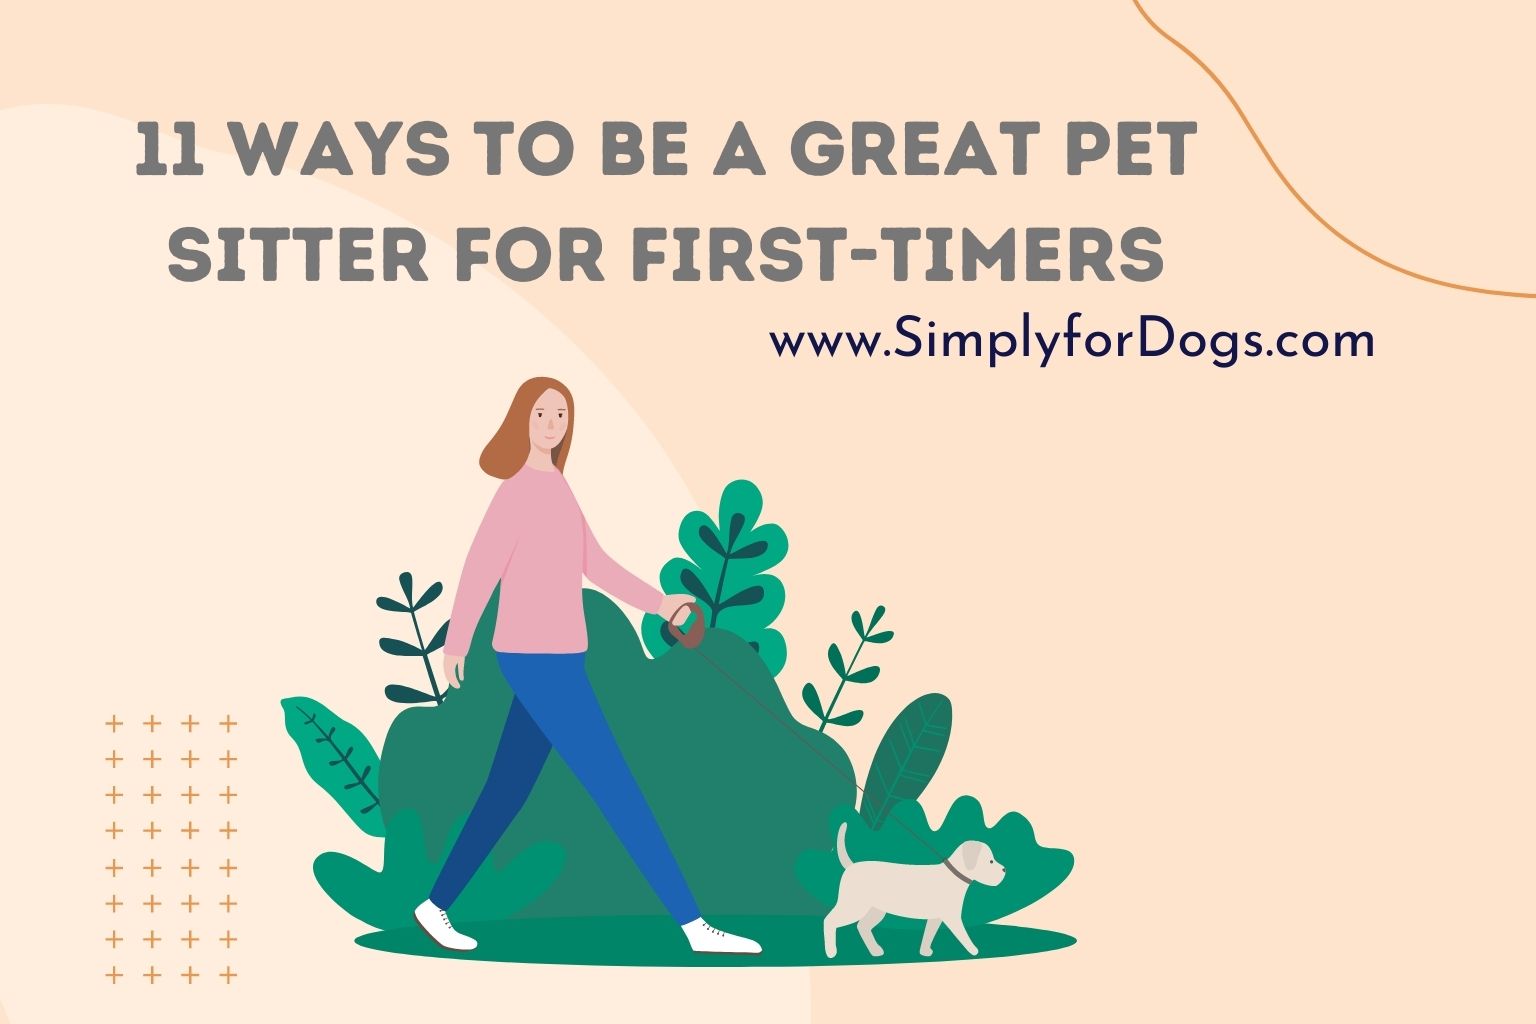 11 Ways to Be a Great Pet Sitter for First-Timers